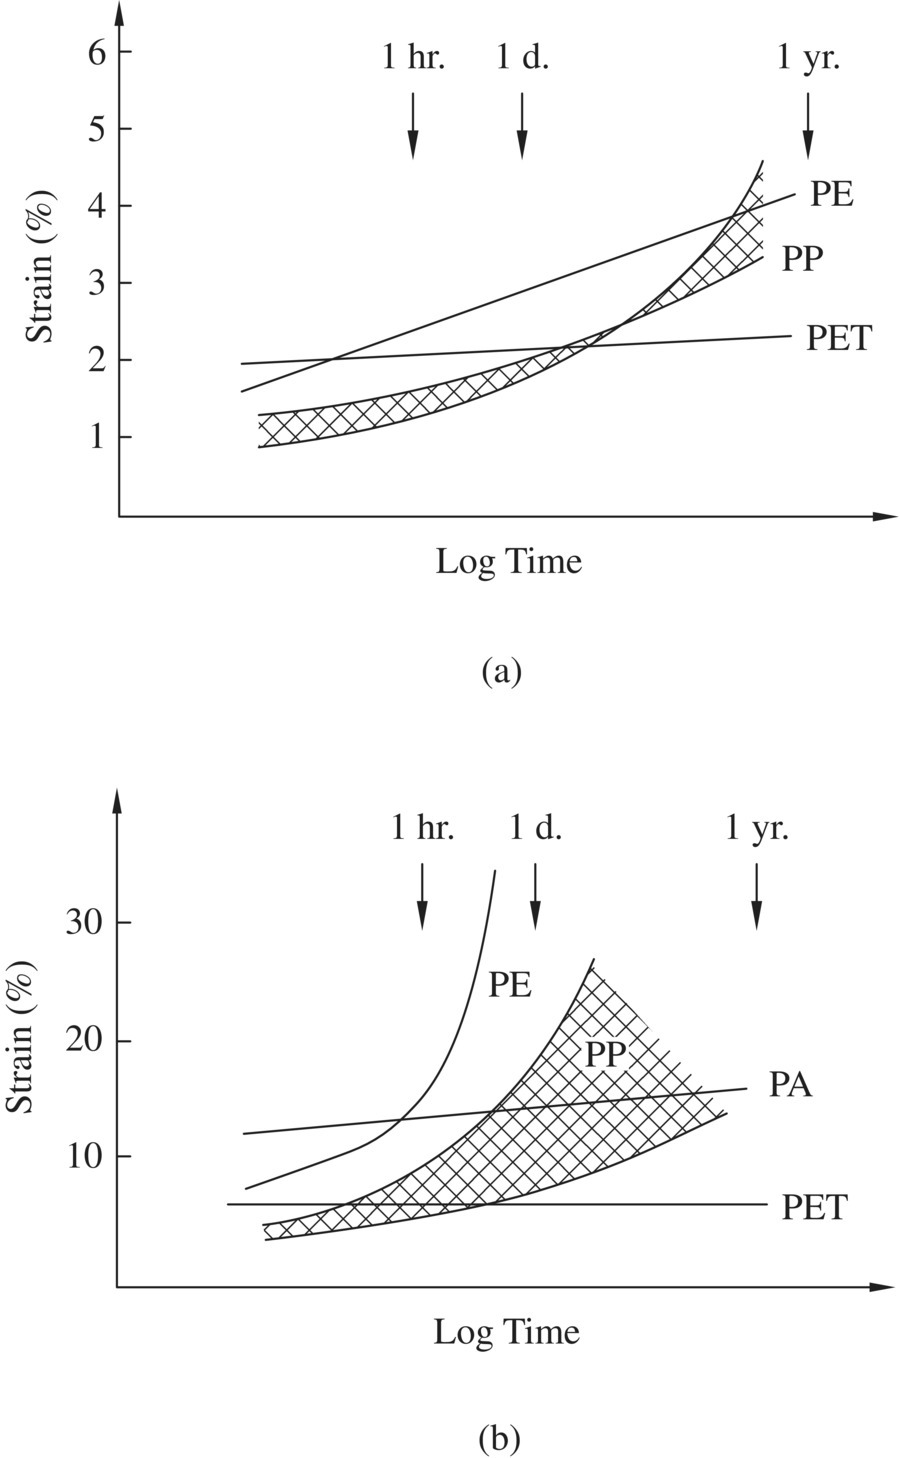 Graph of creep behavior of different polymers at 20% of the ultimate level (left) and at 60% of the ultimate level (right). The left graph has 3 lines for PE, PP, and PET. The right graph has 4 lines for PE, PP, PA, and PET.